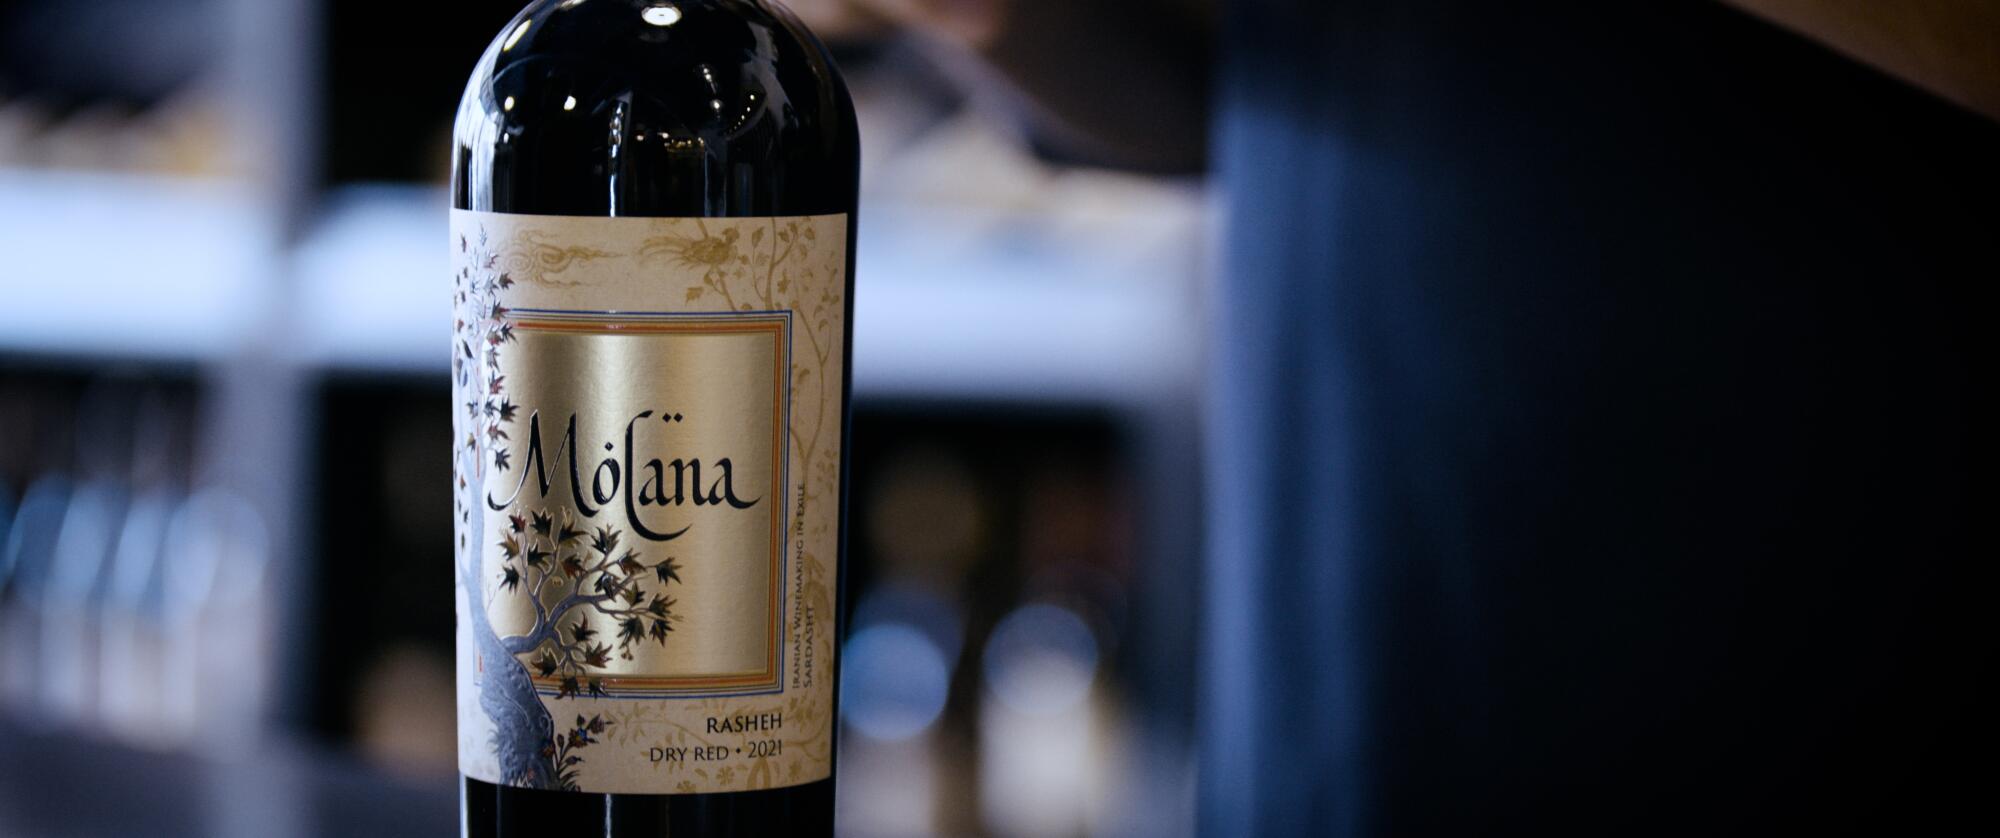 A closeup of the label on a bottle of Mòlna wine made from Rasheh grapes